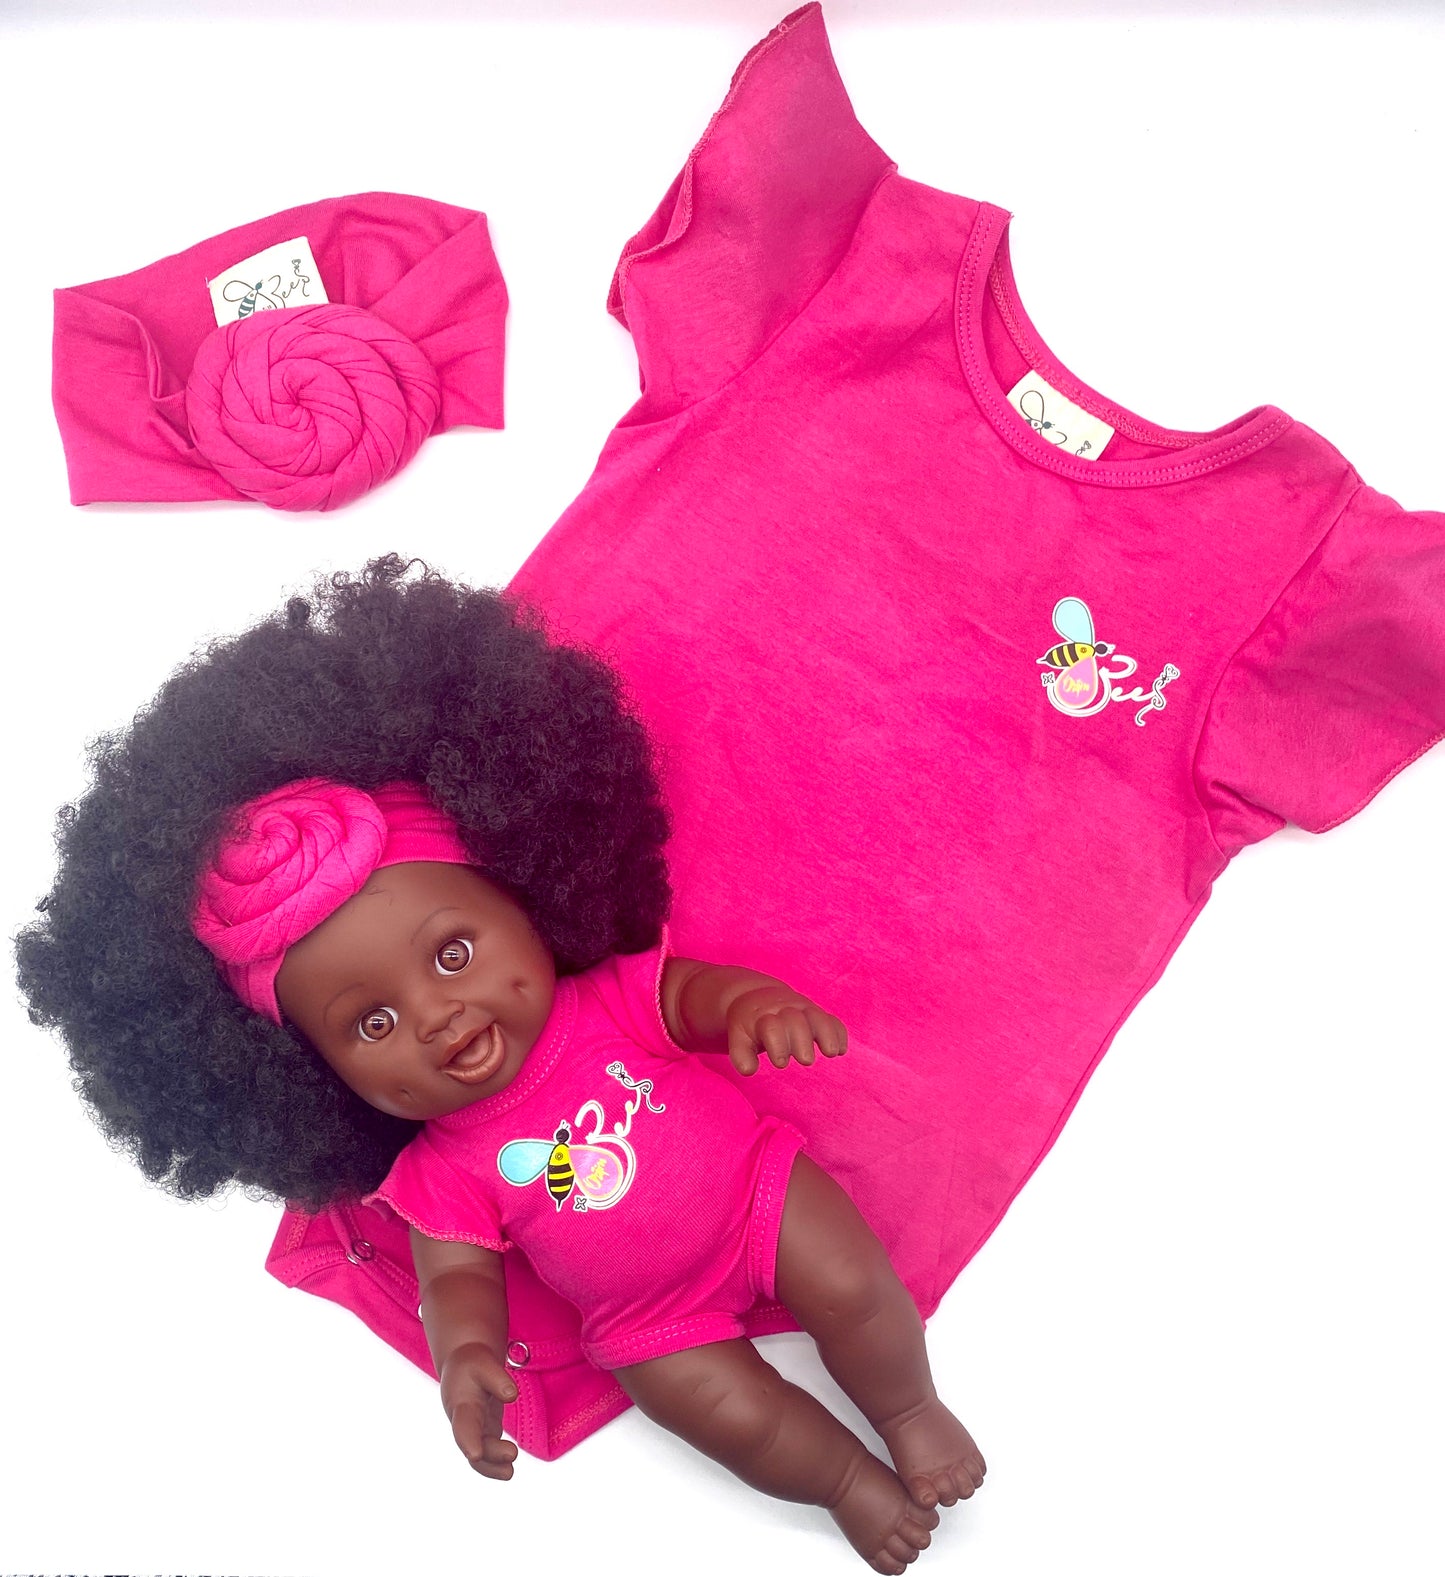 Matching Girl/Doll Romper & Headbands Set (doll sold separately)